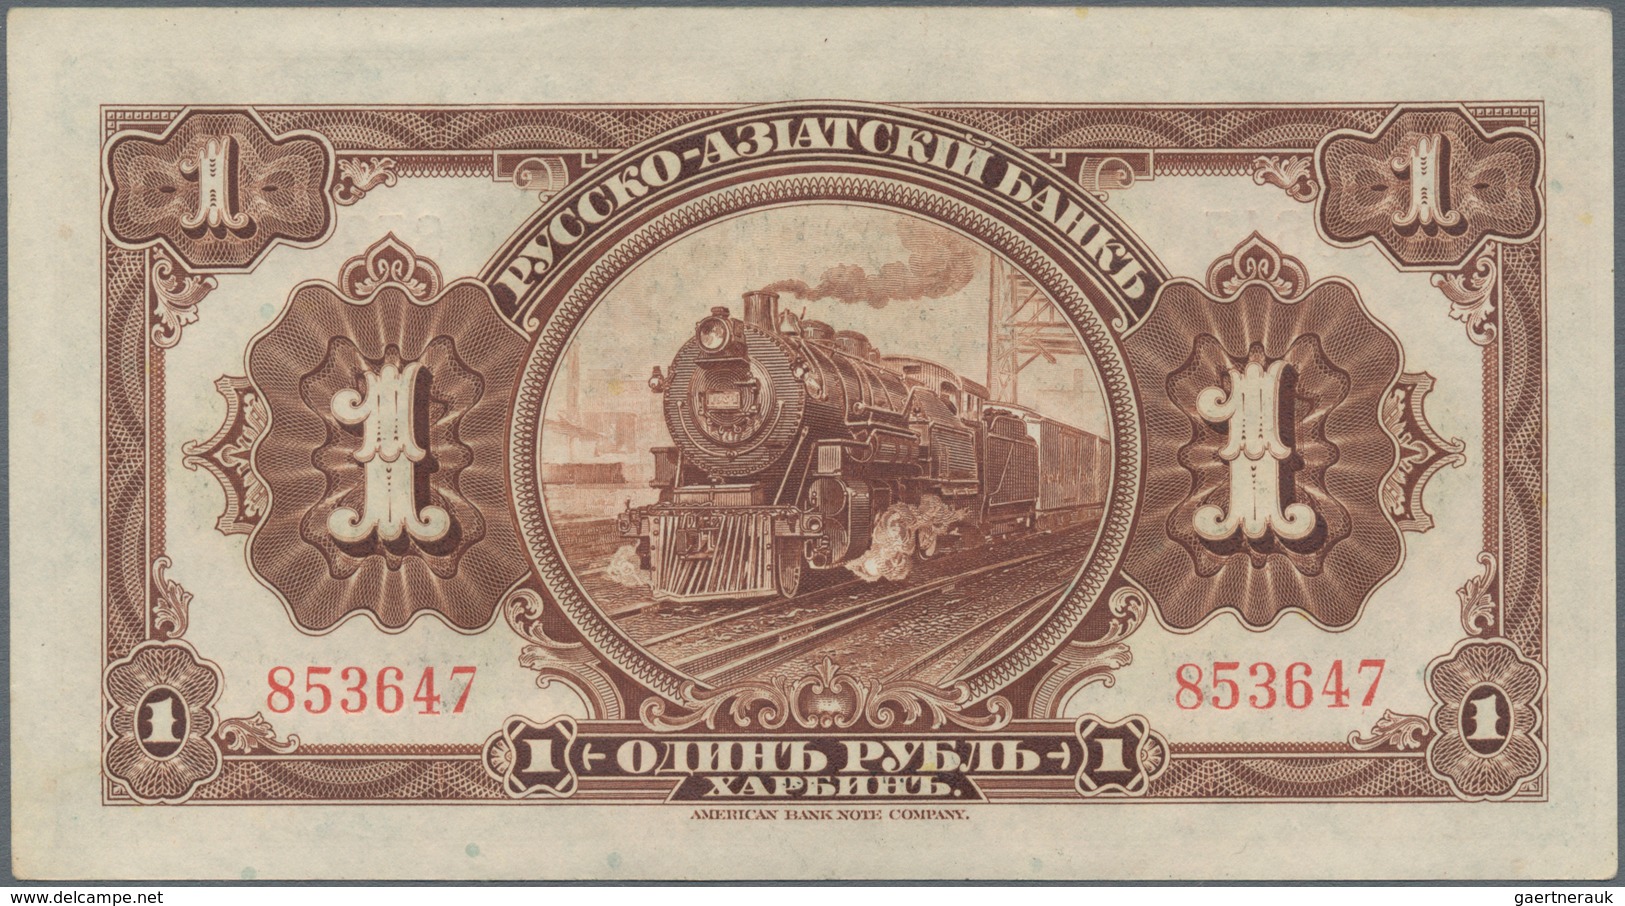 China: Set with 5 banknotes of the 1 Ruble Russo-Asiatic Bank HARBIN branch ND(1917), P.S474, all in